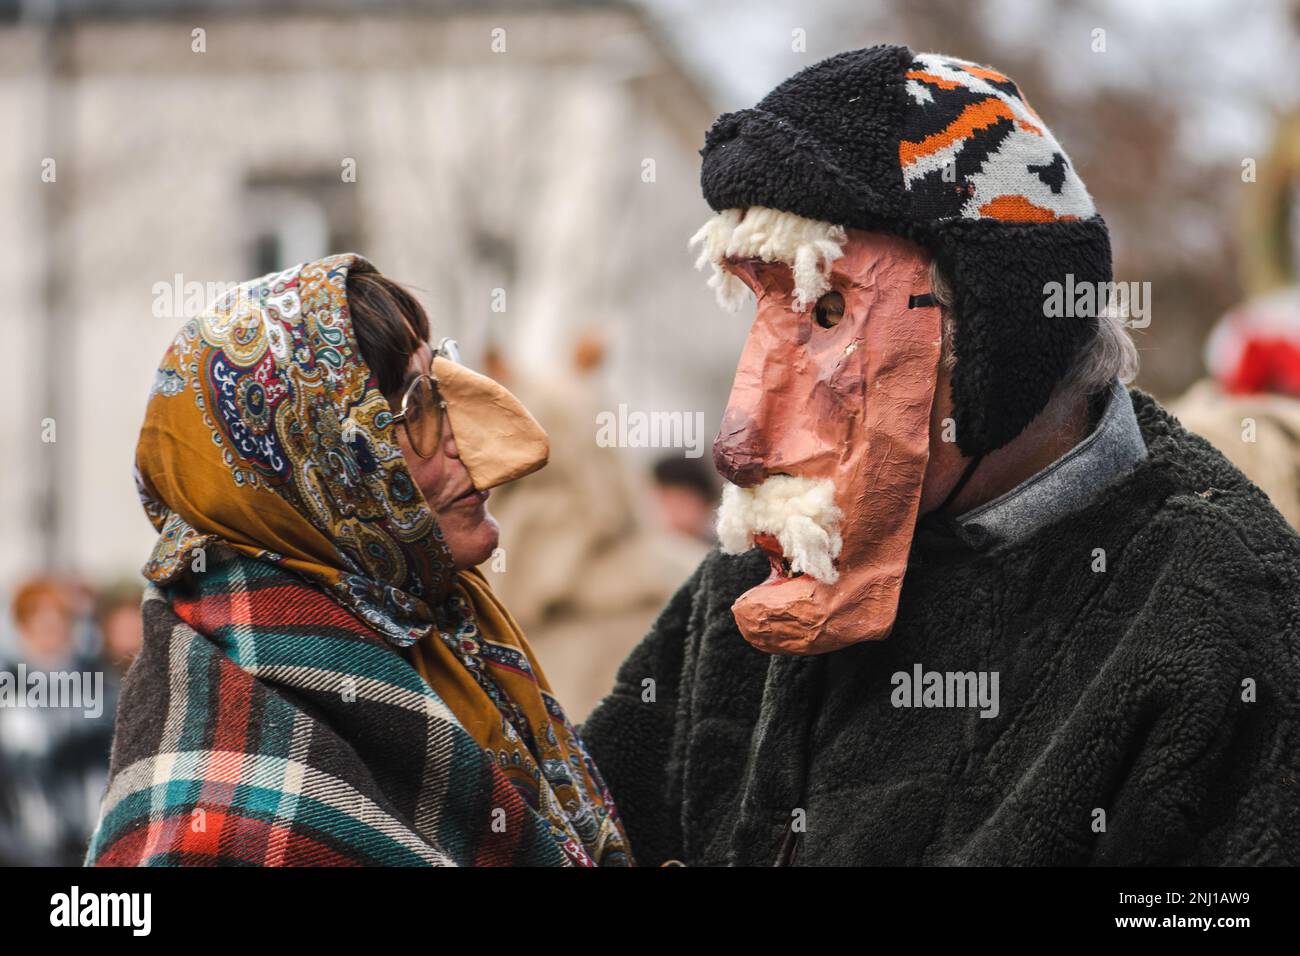 Traditional masks and costumes in Lithuania during Uzgavenes, a Lithuanian folk festival during Carnival, seventh week before Easter Stock Photo